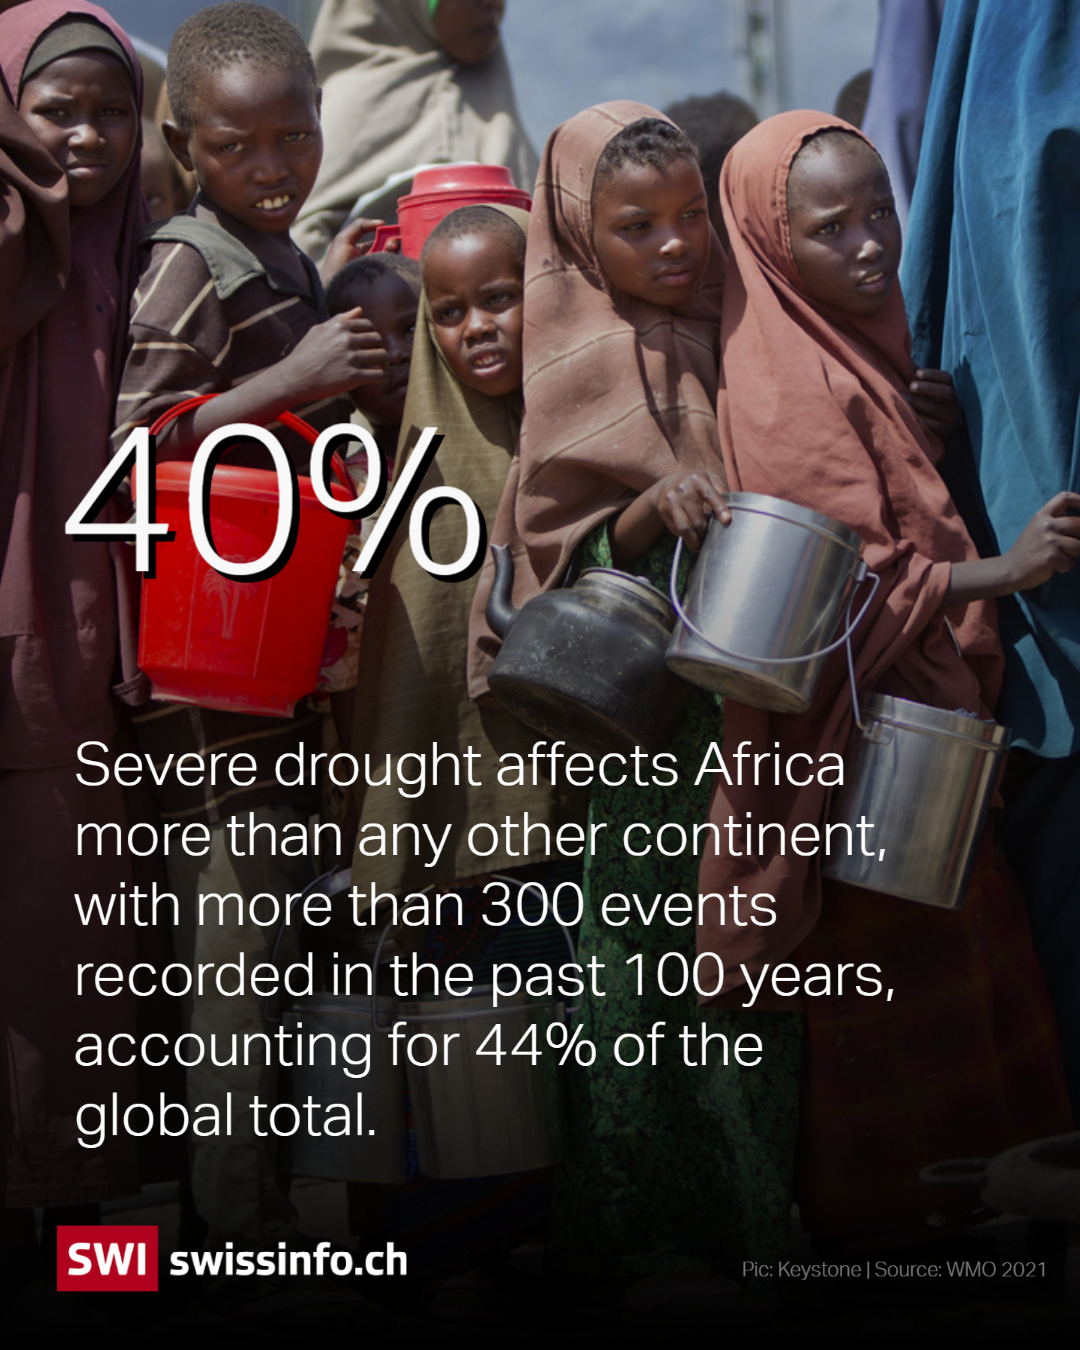 Africa is the most affected continent - it has more than 300 recorded events in the past 100 years